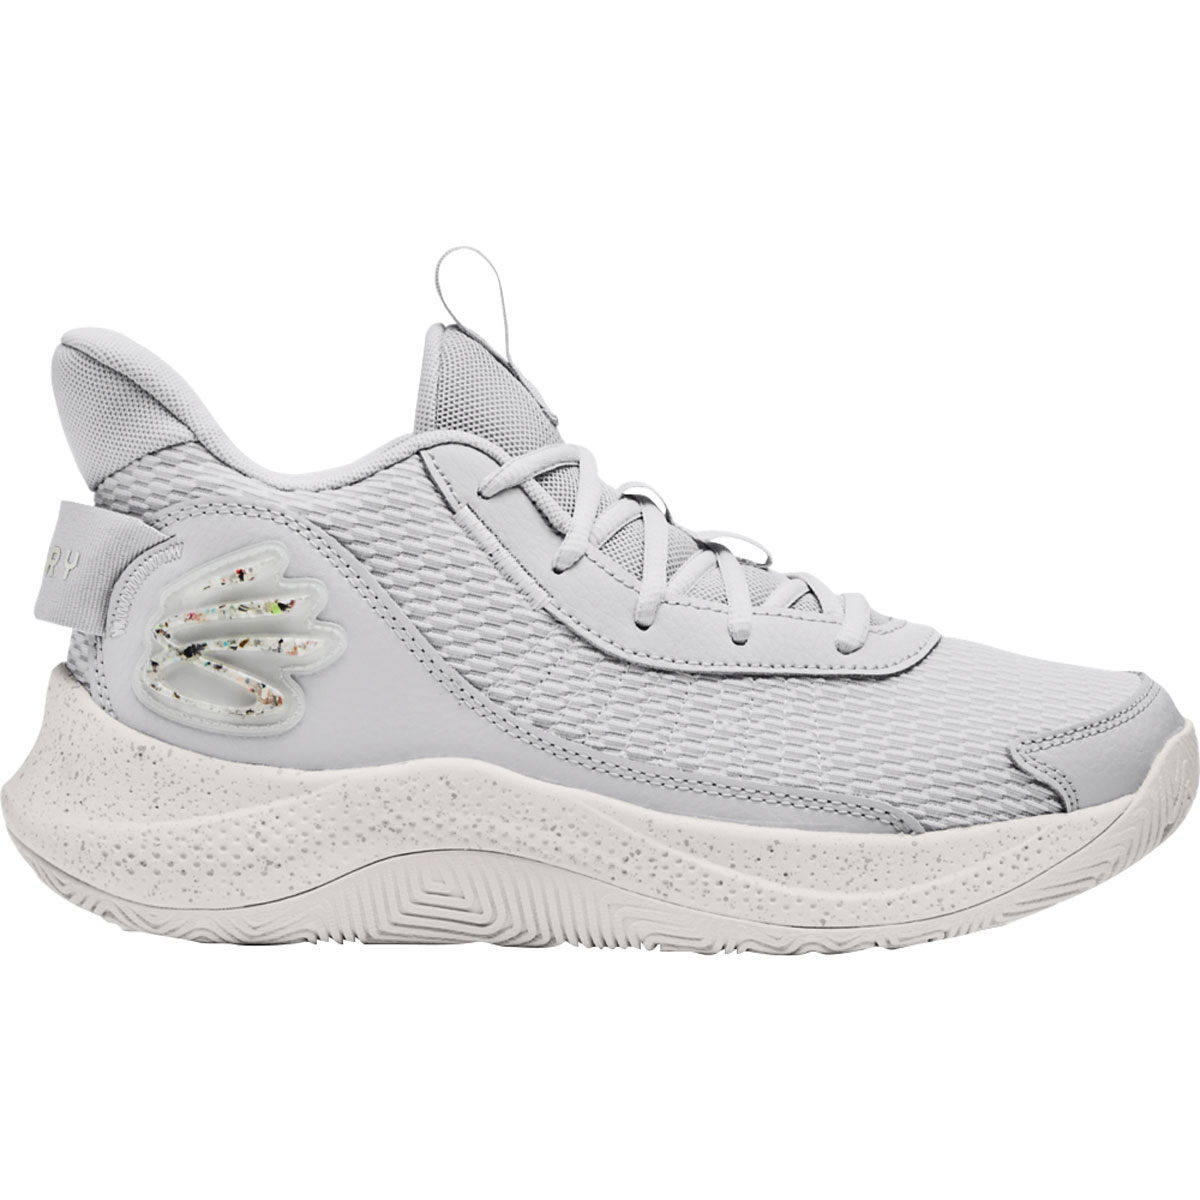 Sneakers Release: Under Armor Curry 7 “White” Men’s  Basketball Shoe